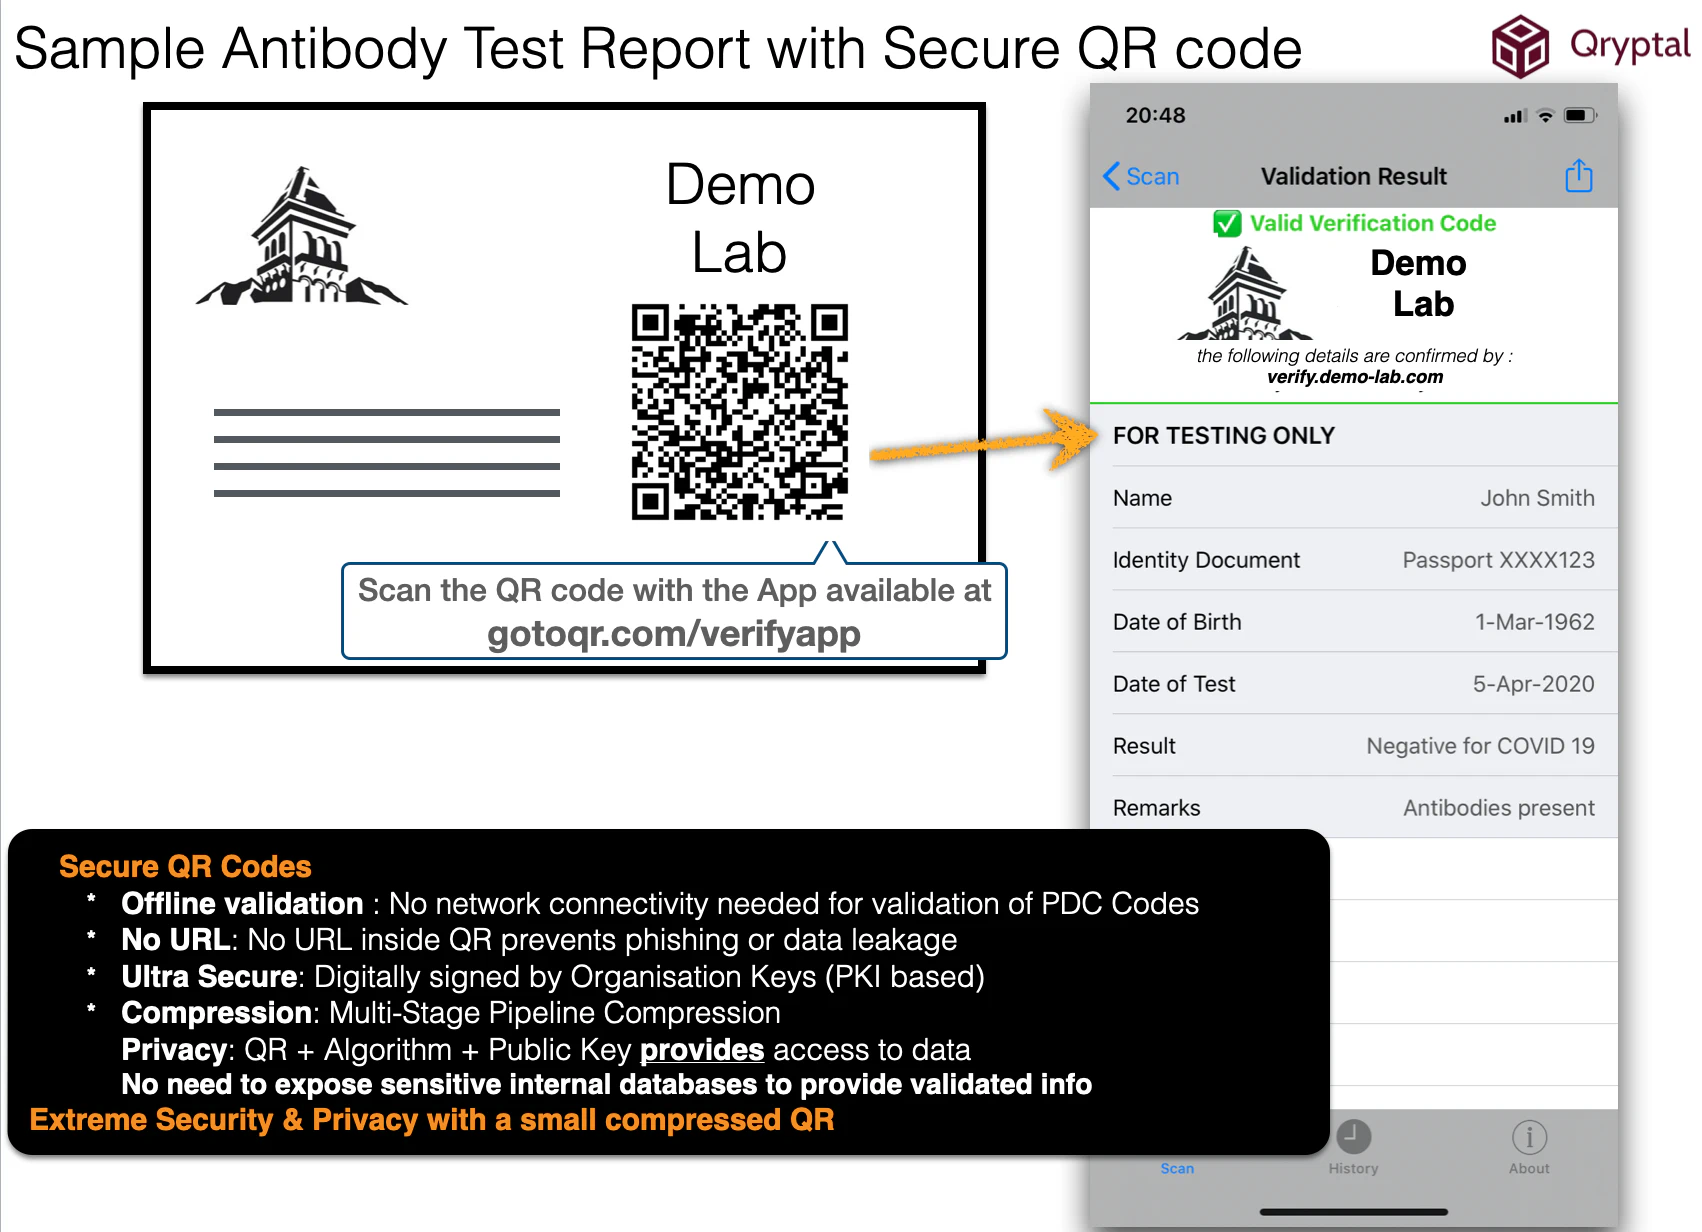 Sample immunity certificate with QR code